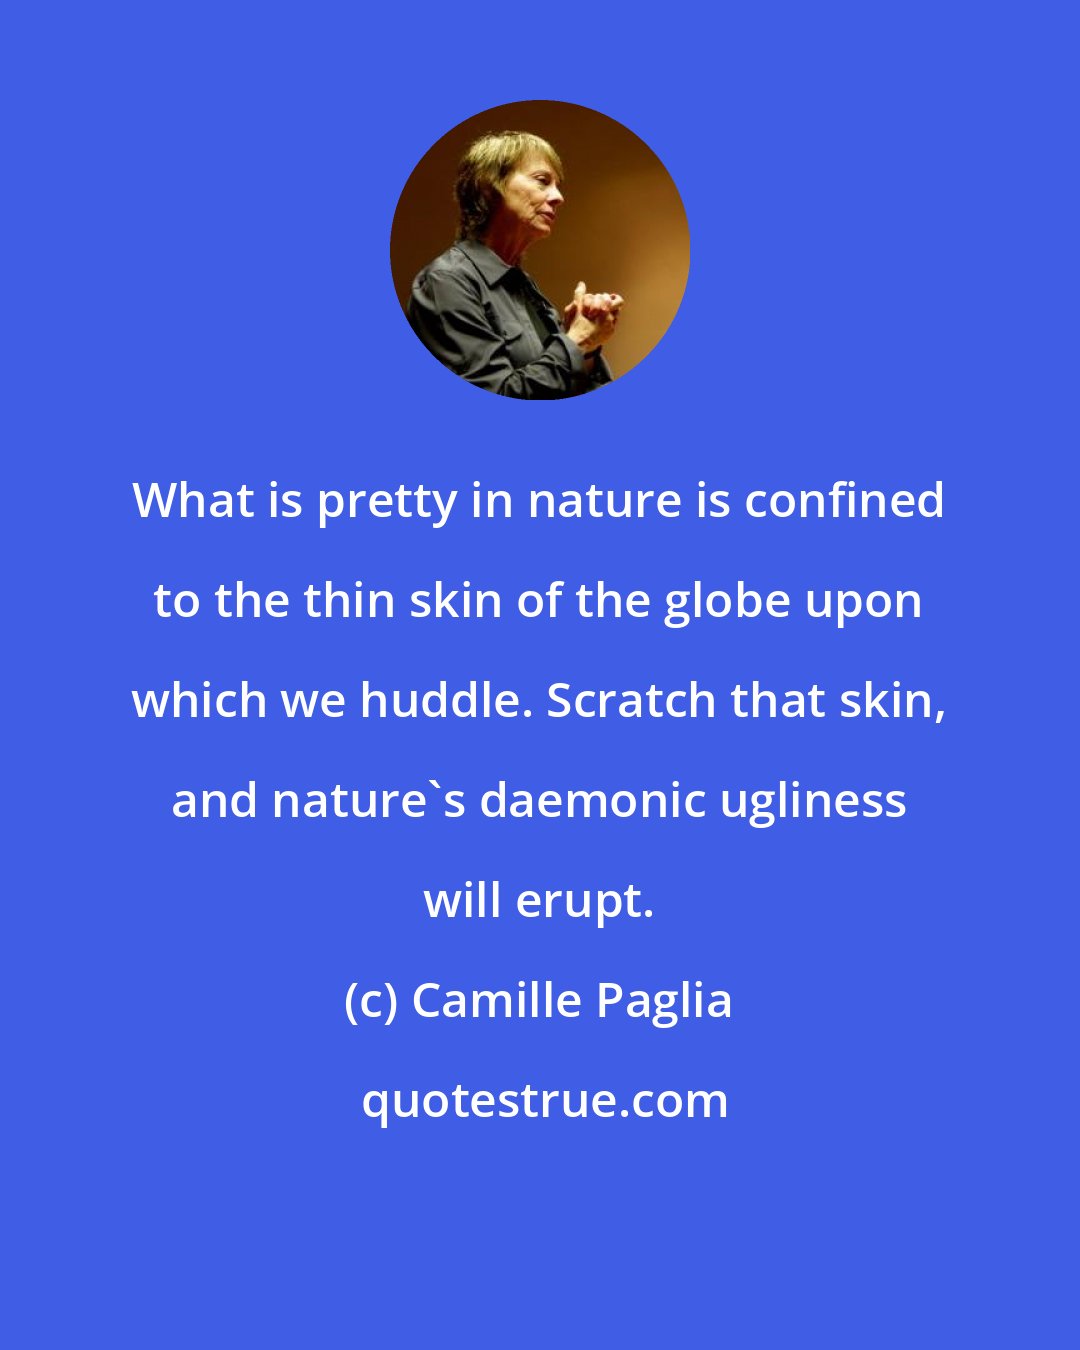 Camille Paglia: What is pretty in nature is confined to the thin skin of the globe upon which we huddle. Scratch that skin, and nature's daemonic ugliness will erupt.